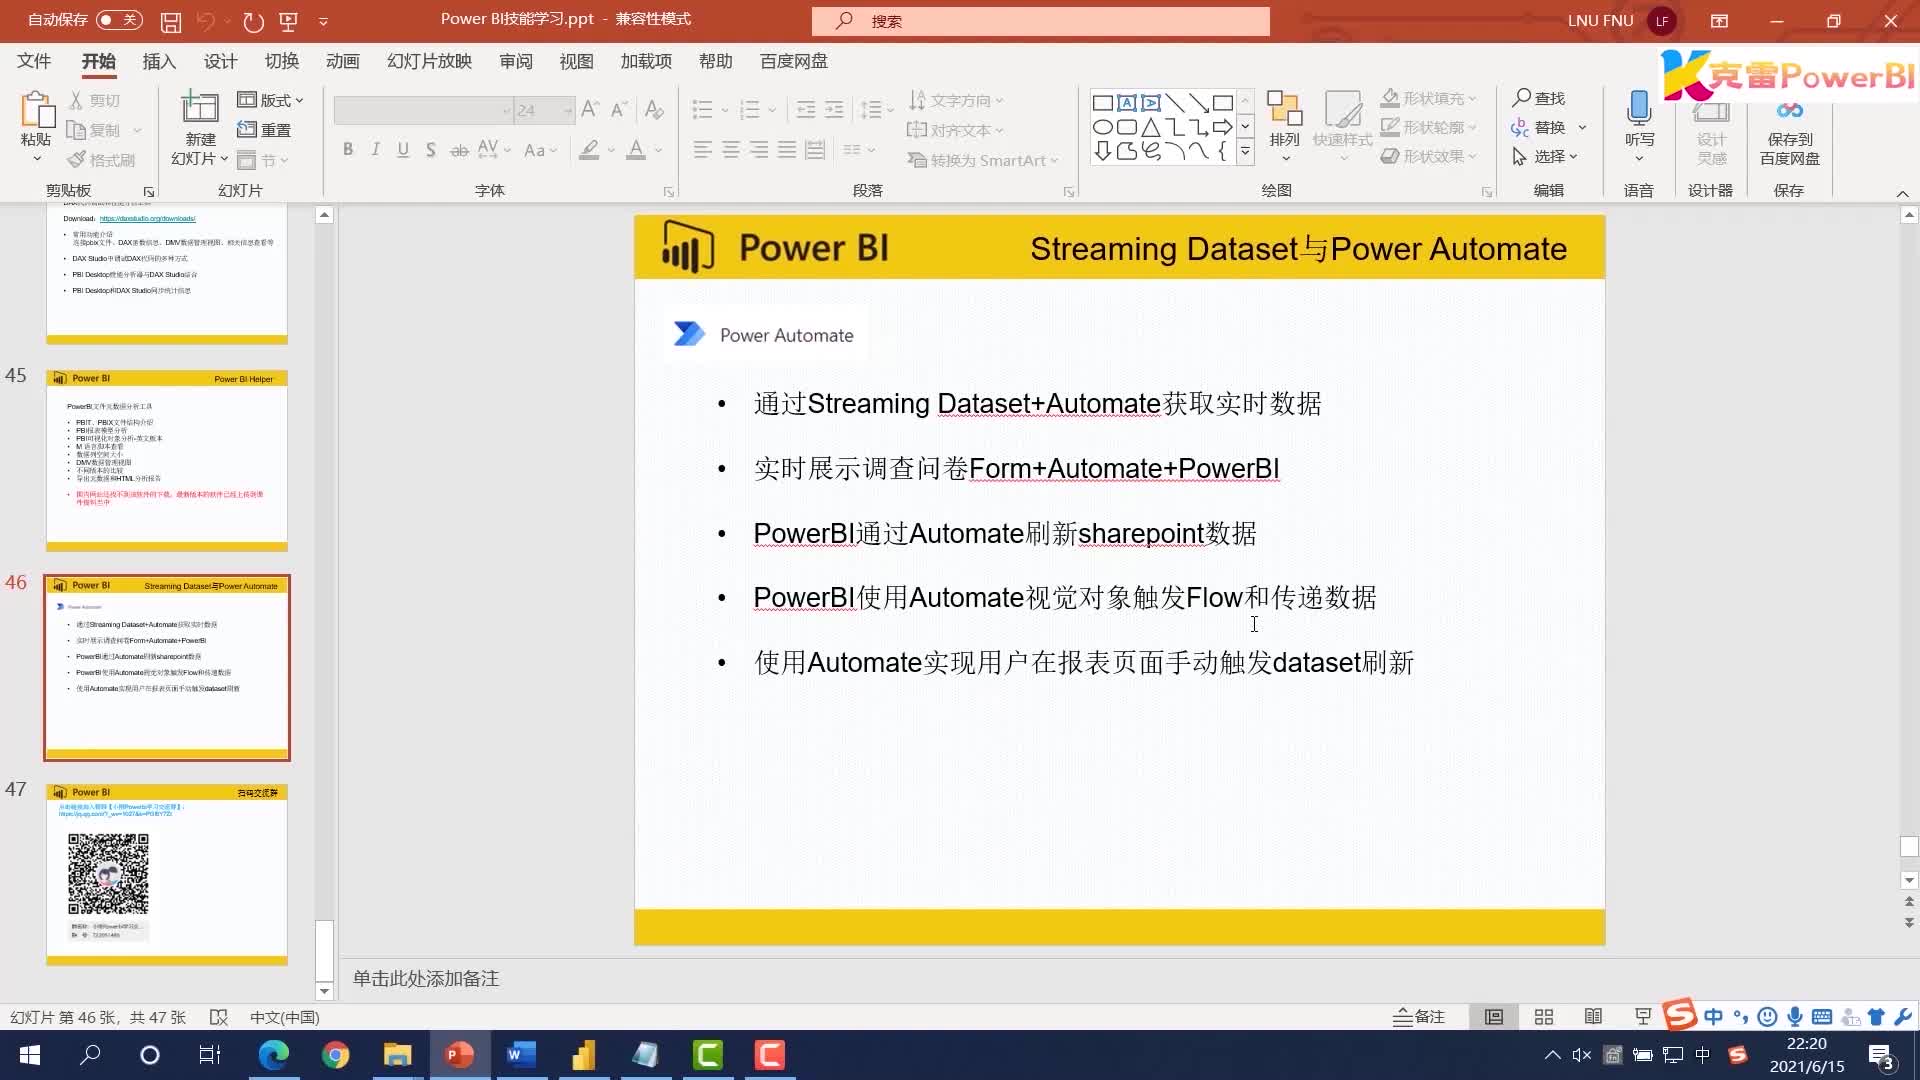 Streaming Dataset和Power Automate的使用